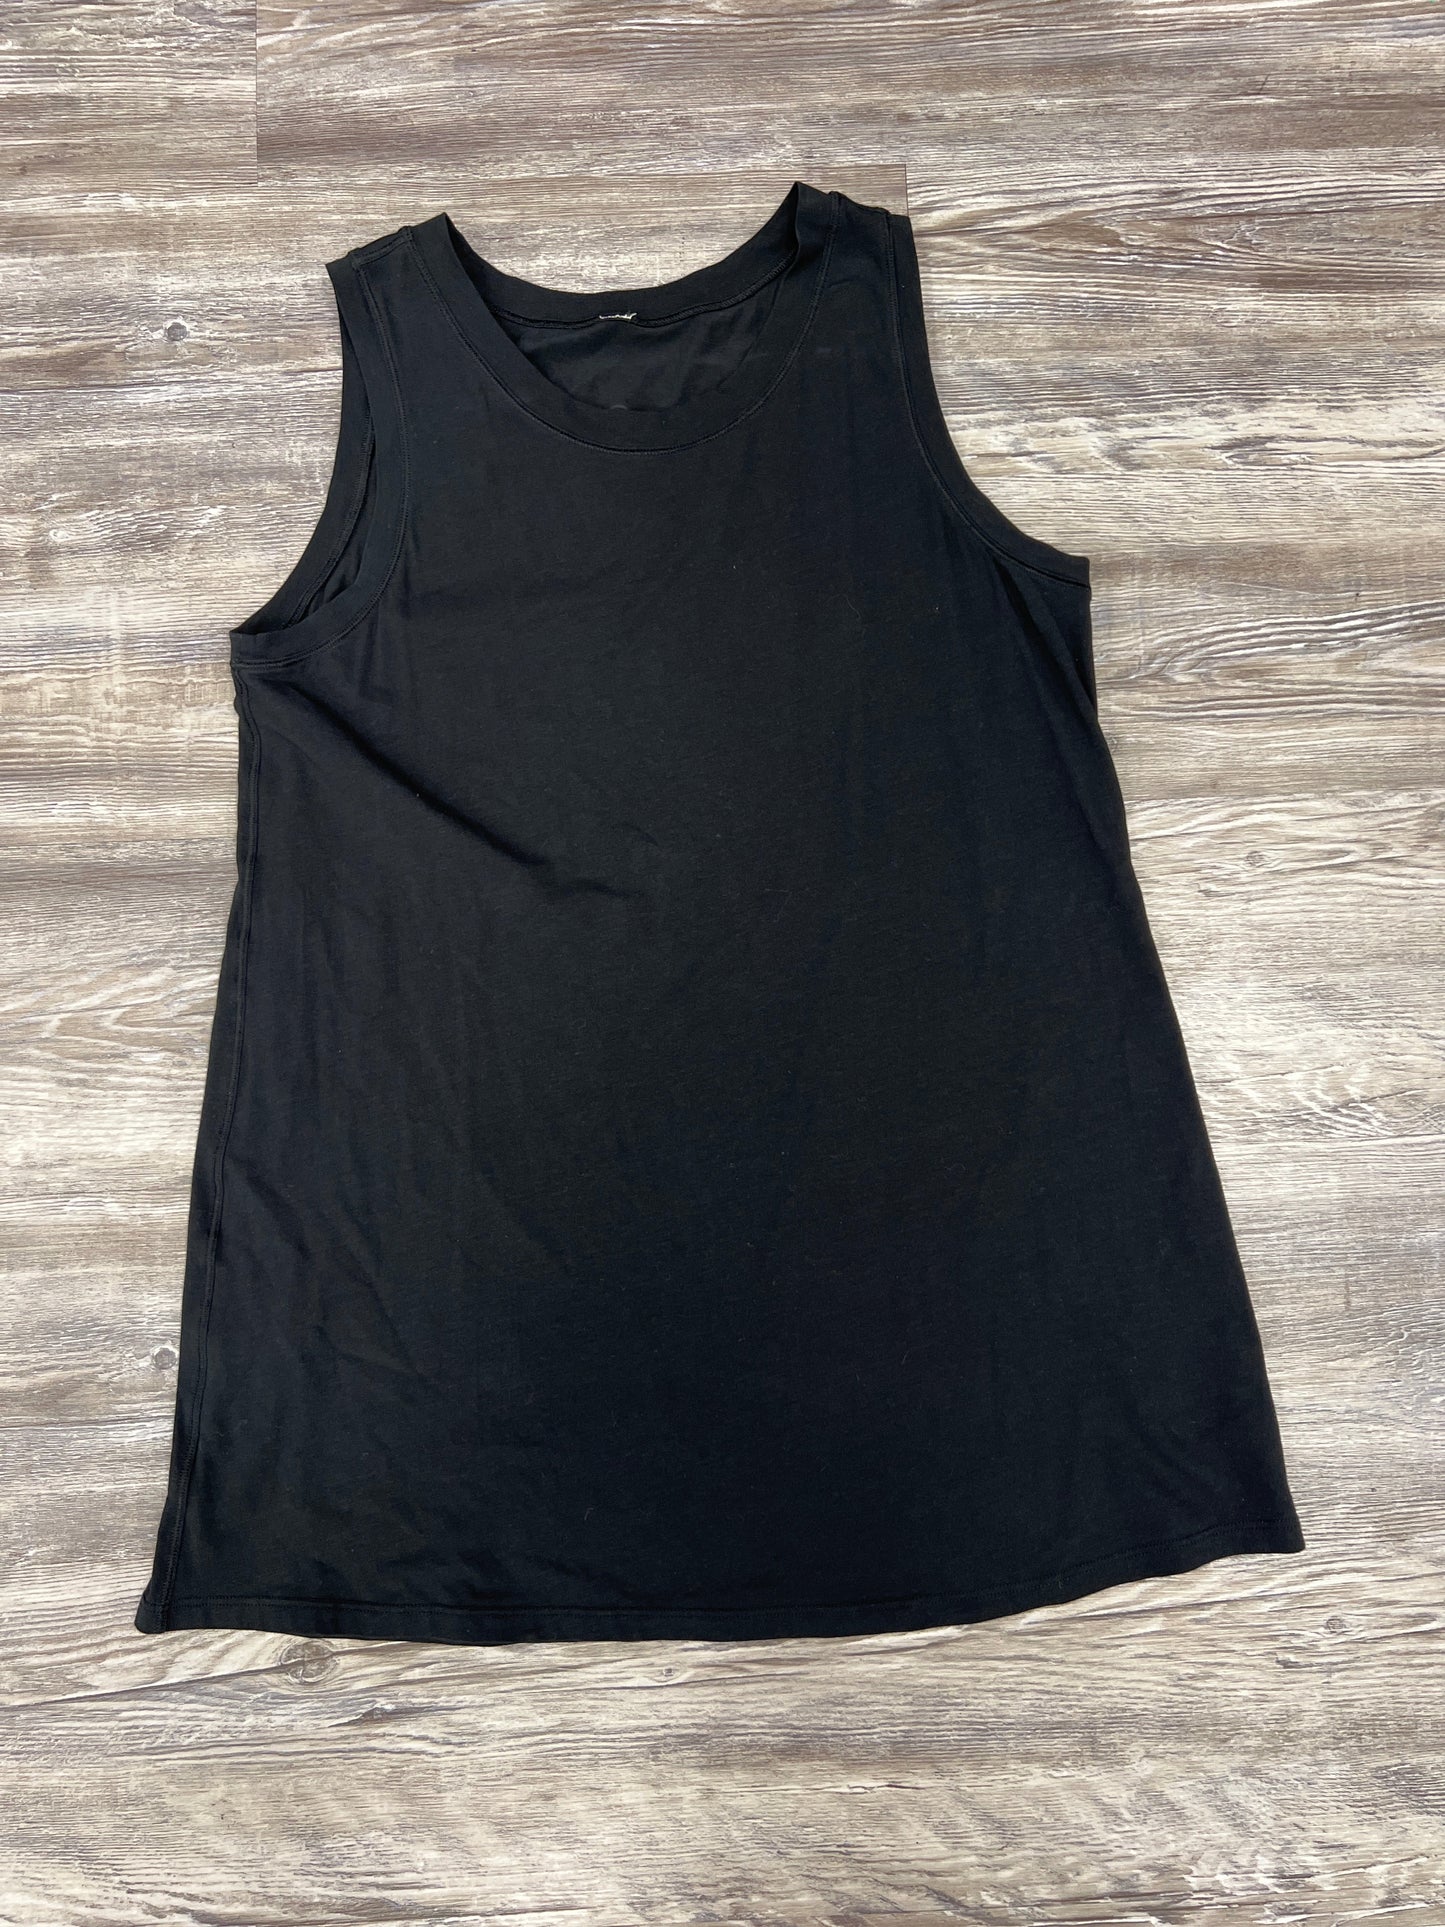 Athletic Tank Top By Lululemon Size: S